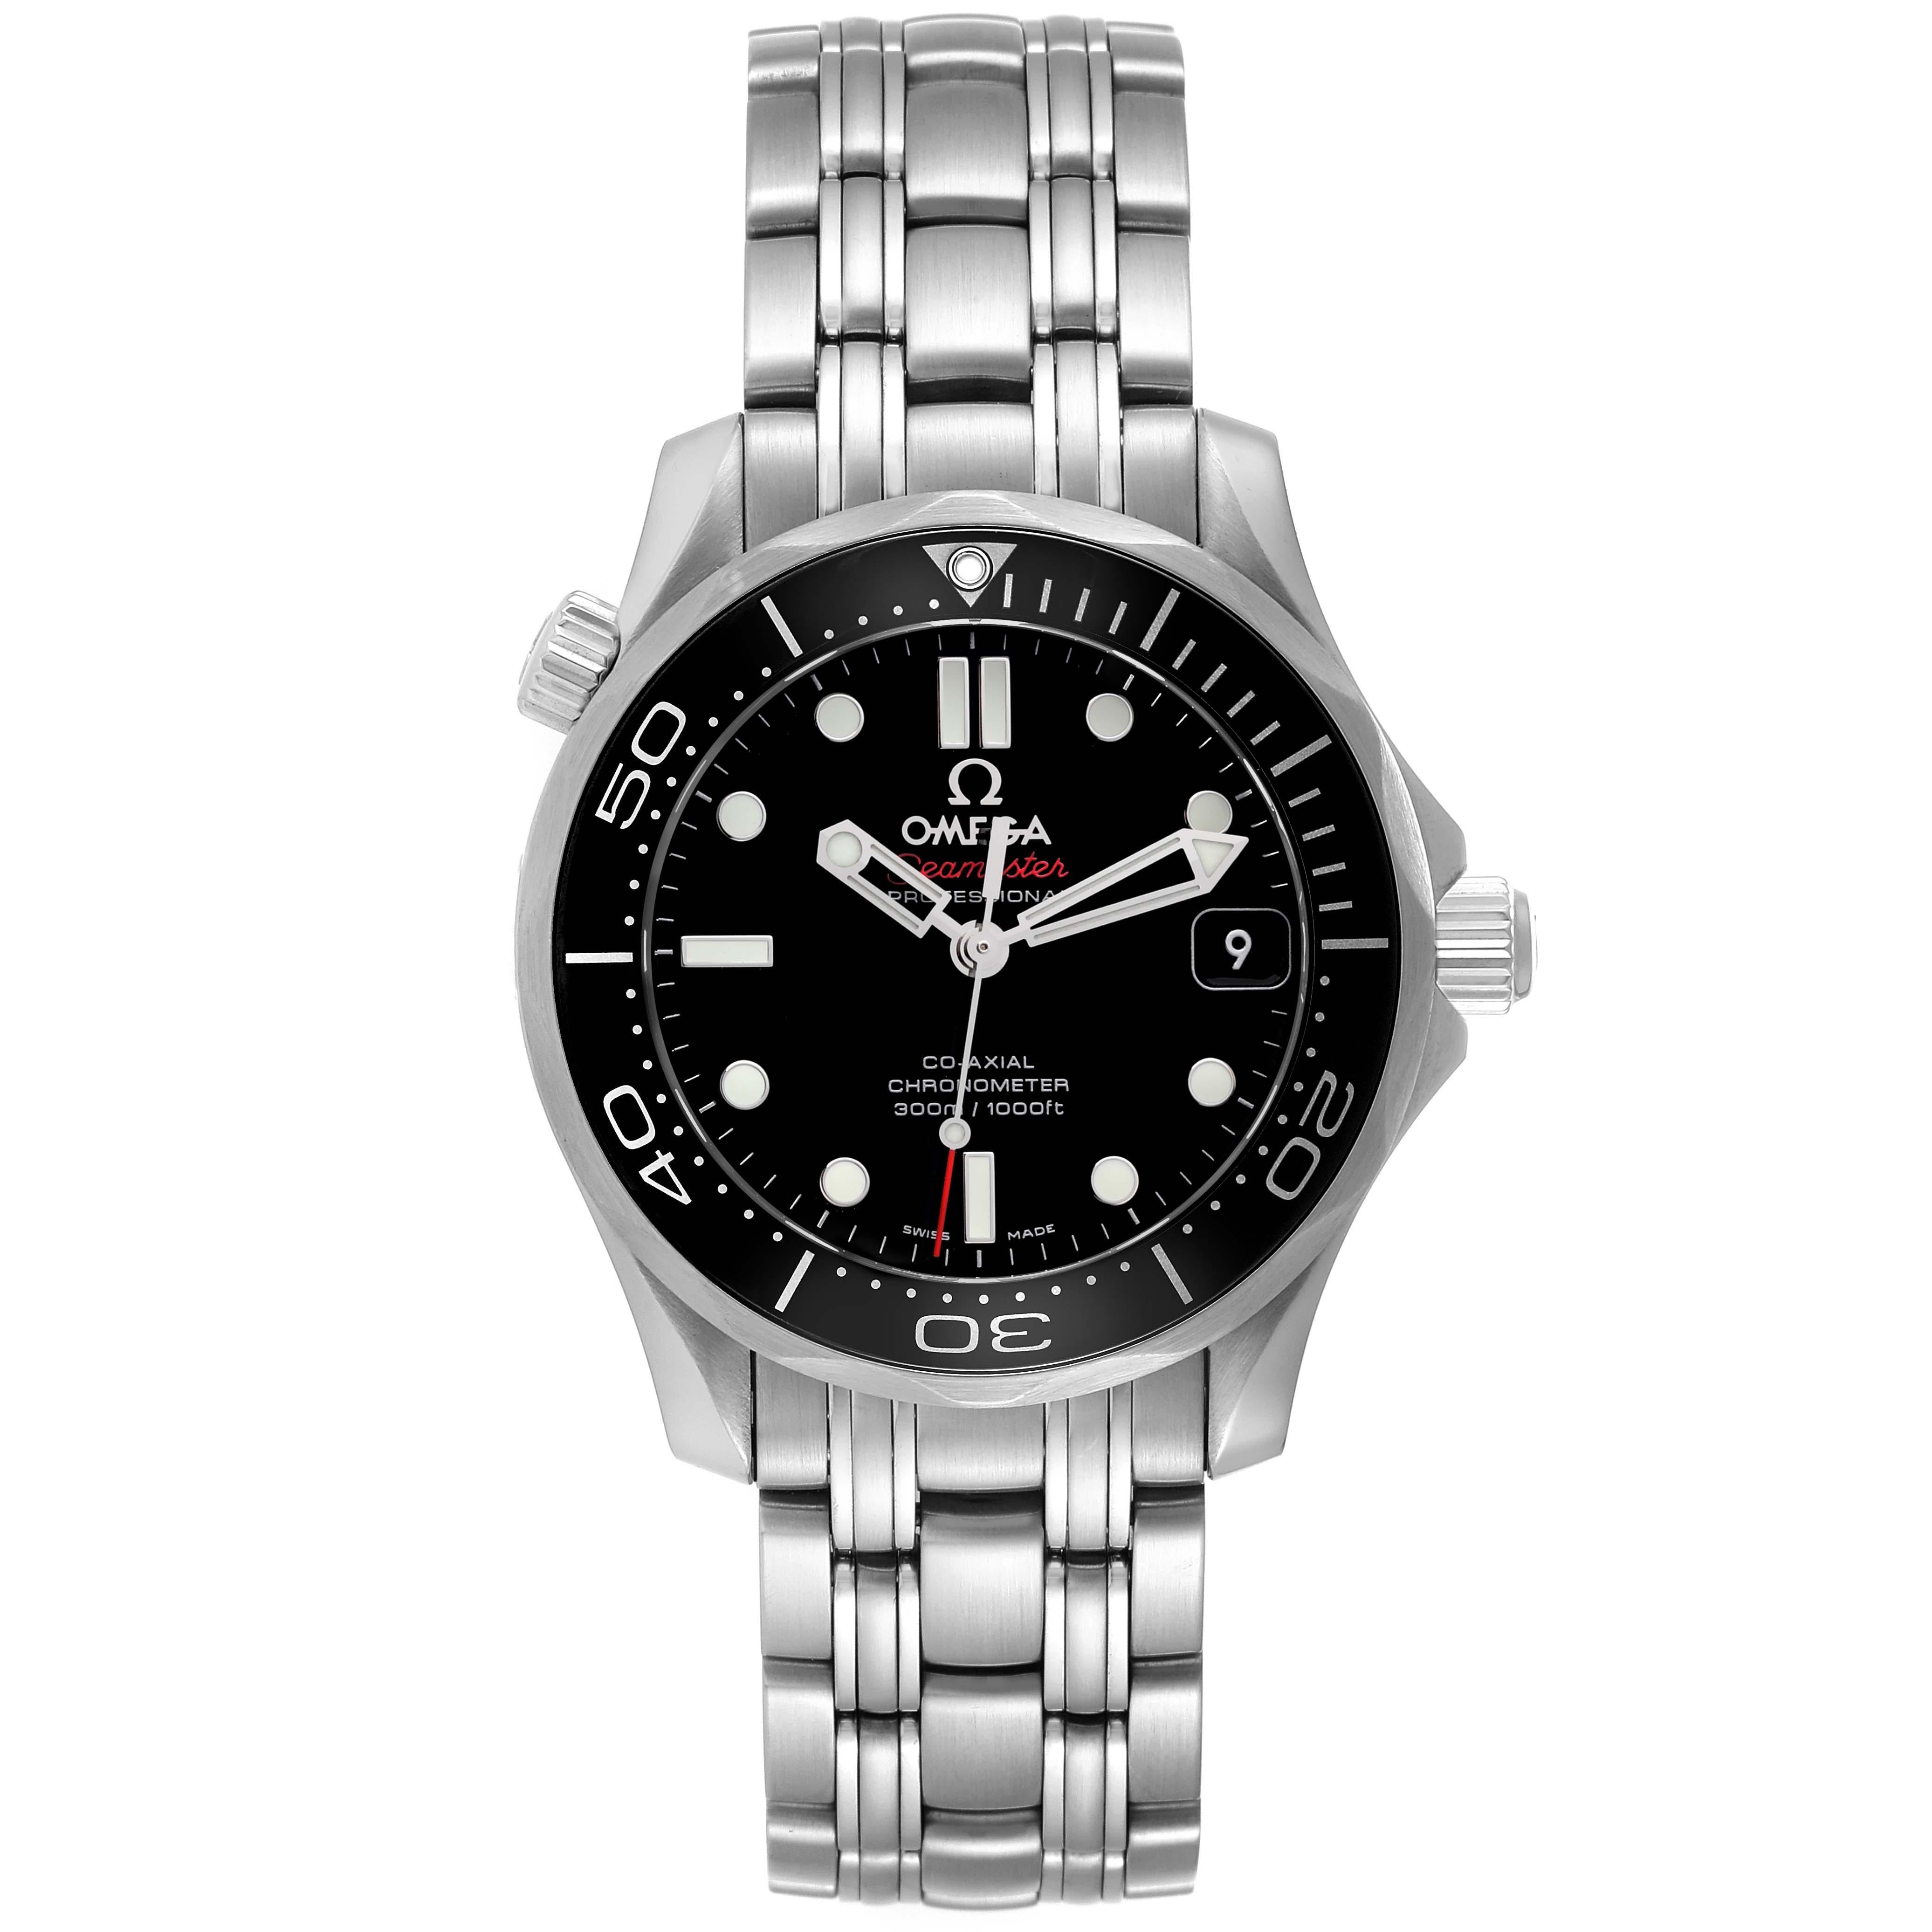 Omega Seamaster 300M Midsize Steel Mens Watch 212.30.36.20.01.002 Box Card. Automatic chronometer, Co-Axial Escapement movement with rhodium-plated finish. Stainless steel case 36.25 mm in diameter. Omega logo on the crown. Helium-escape valve at 10